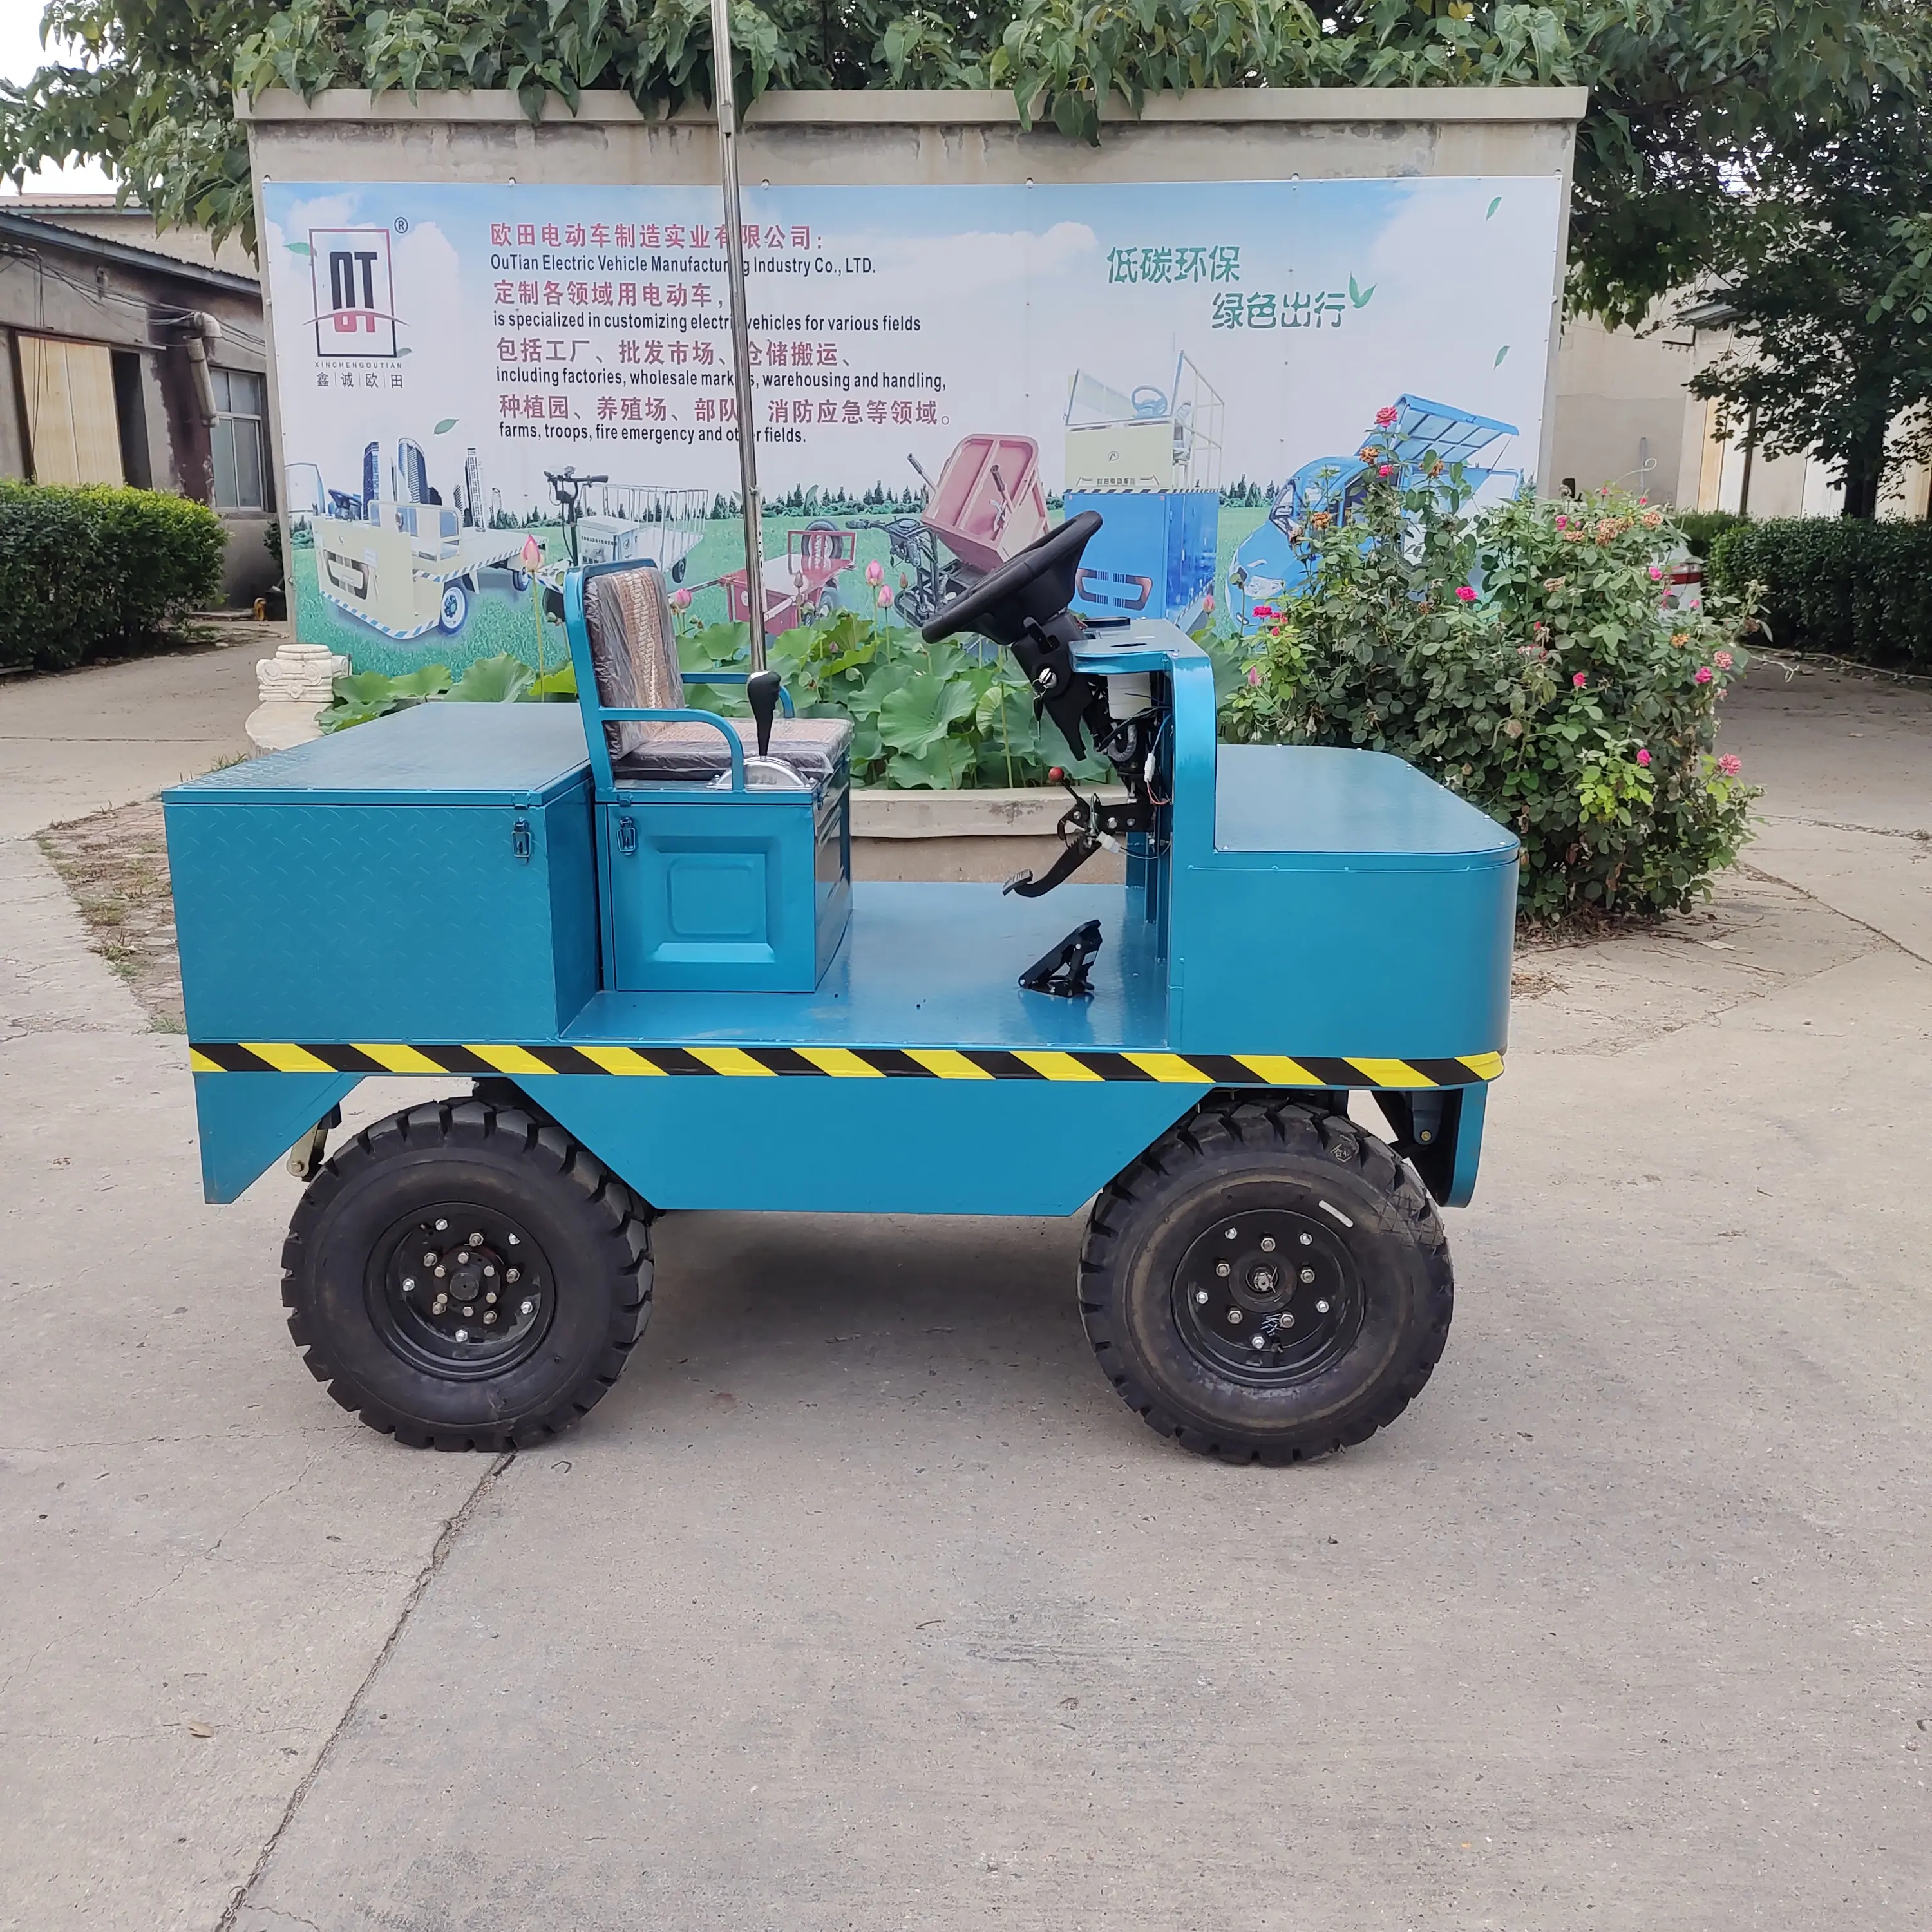 Four-Wheel Quiet Electric Flat Truck With Good Performance And Low Price Plant Warehouse Heavy High Power Tractor